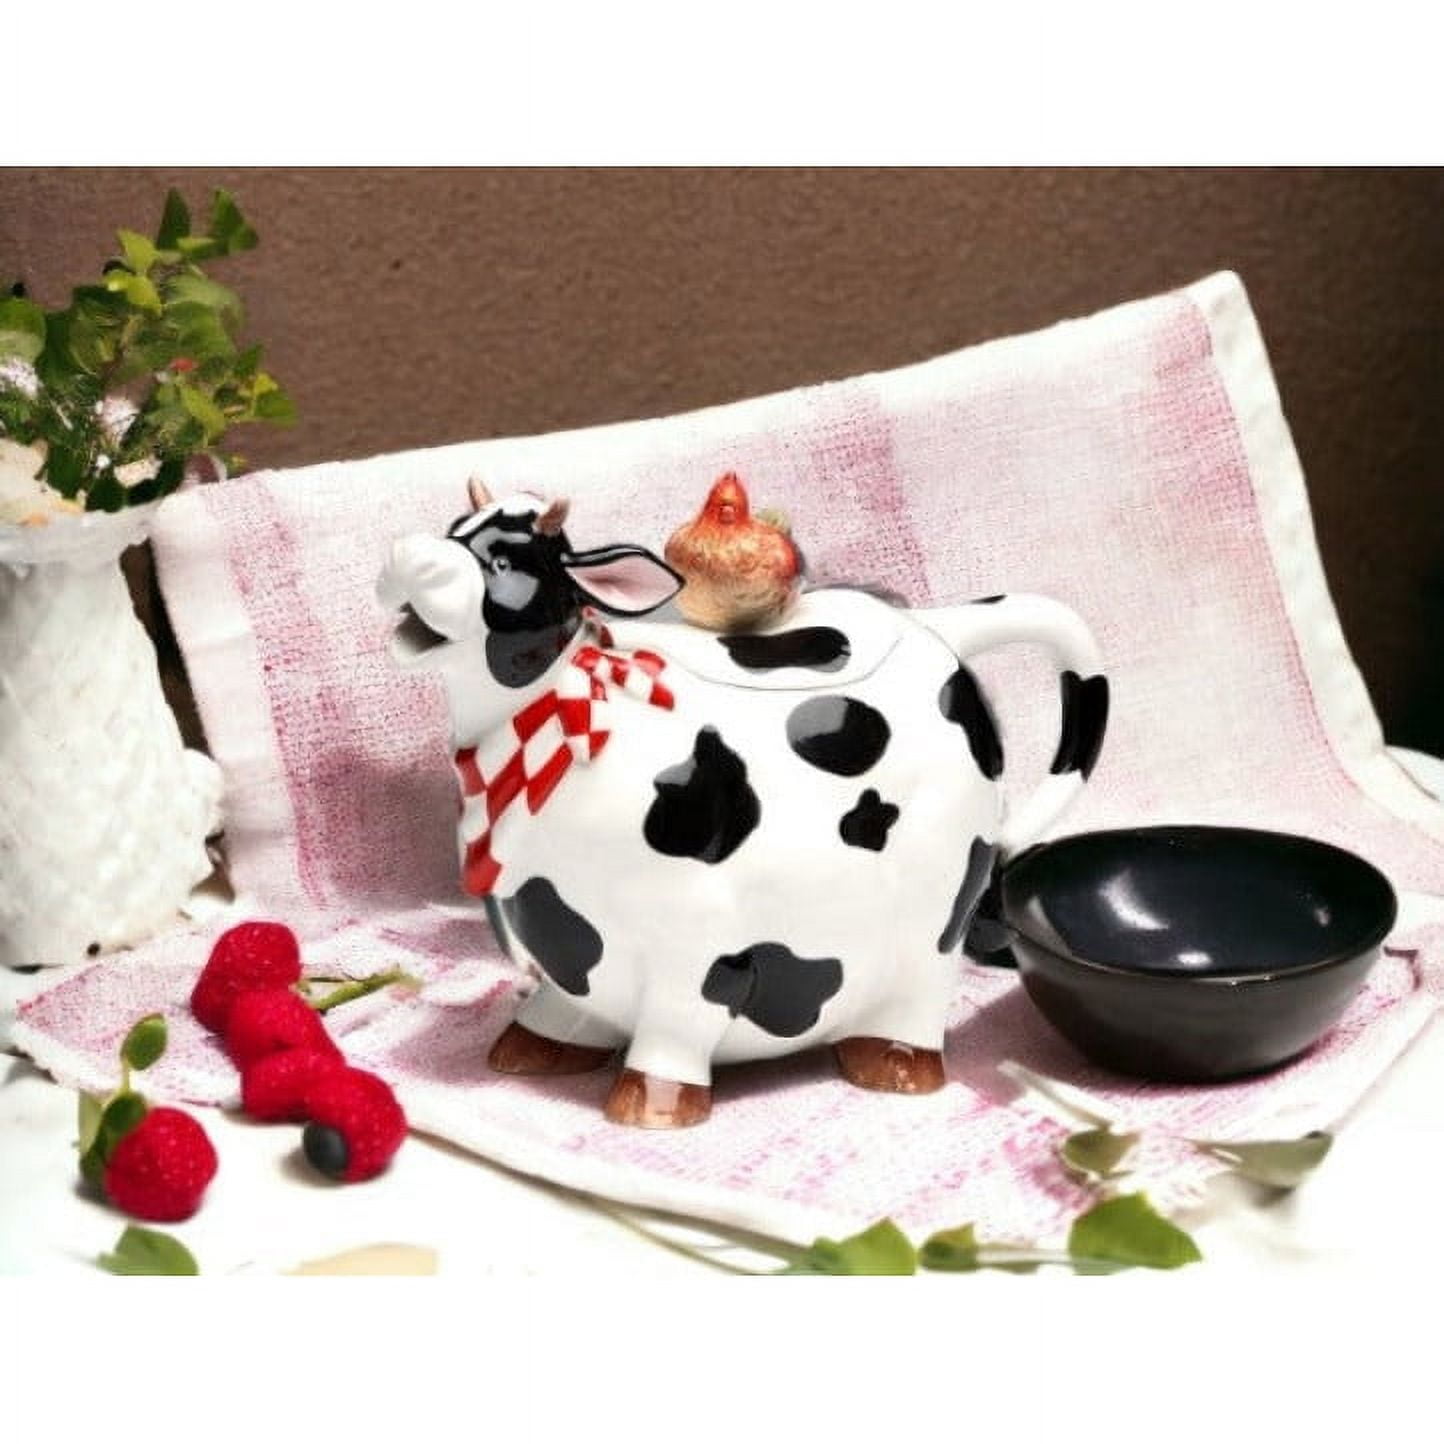 HOME-X Black Rooster Whistling Tea Kettle, Cute Animal Teapot, Kitchen